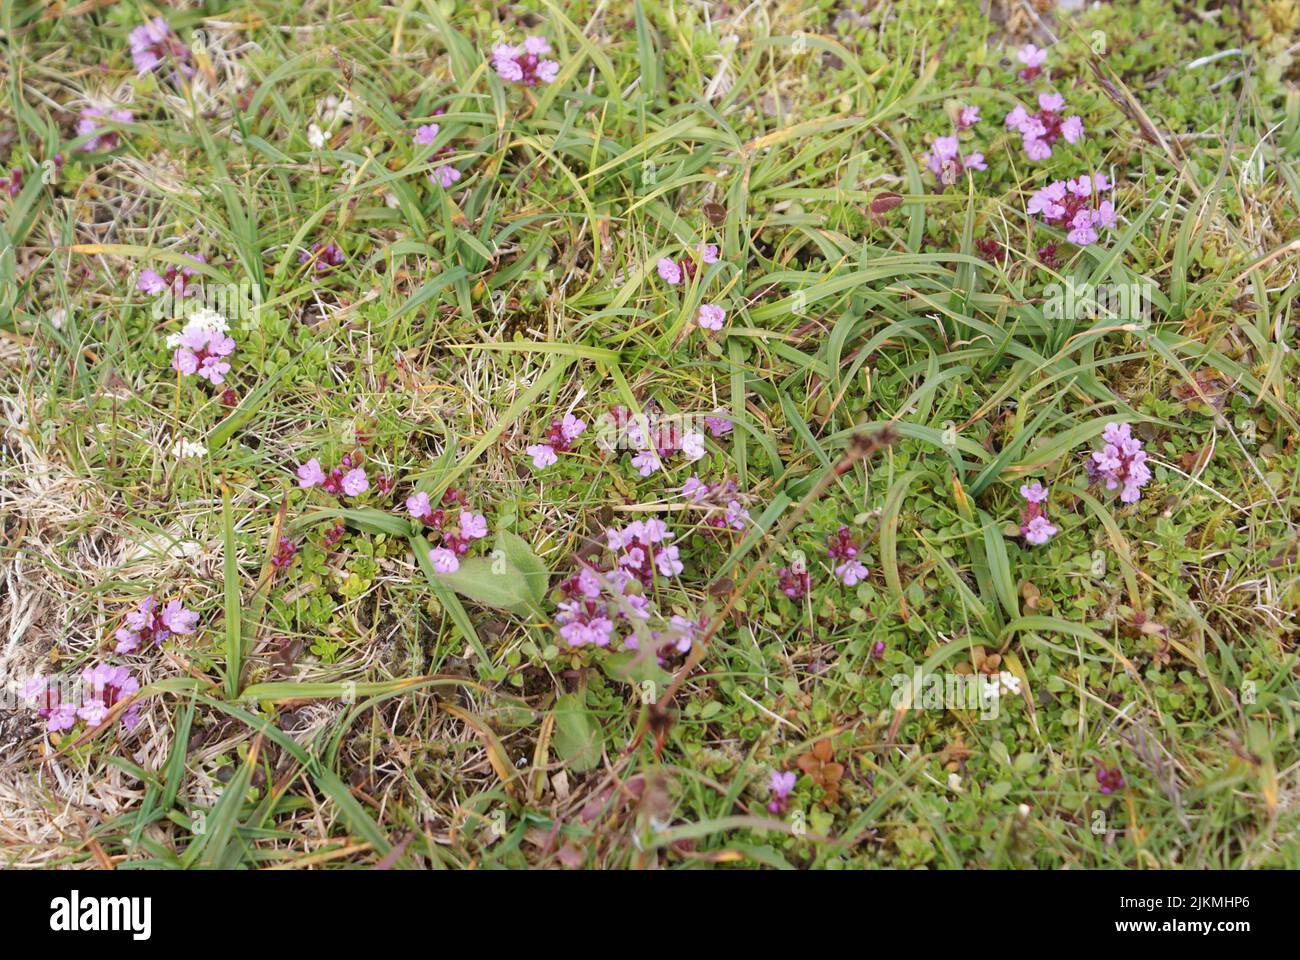 Some thyme flowers grow on the ground surrounded by rocks. Stock Photo